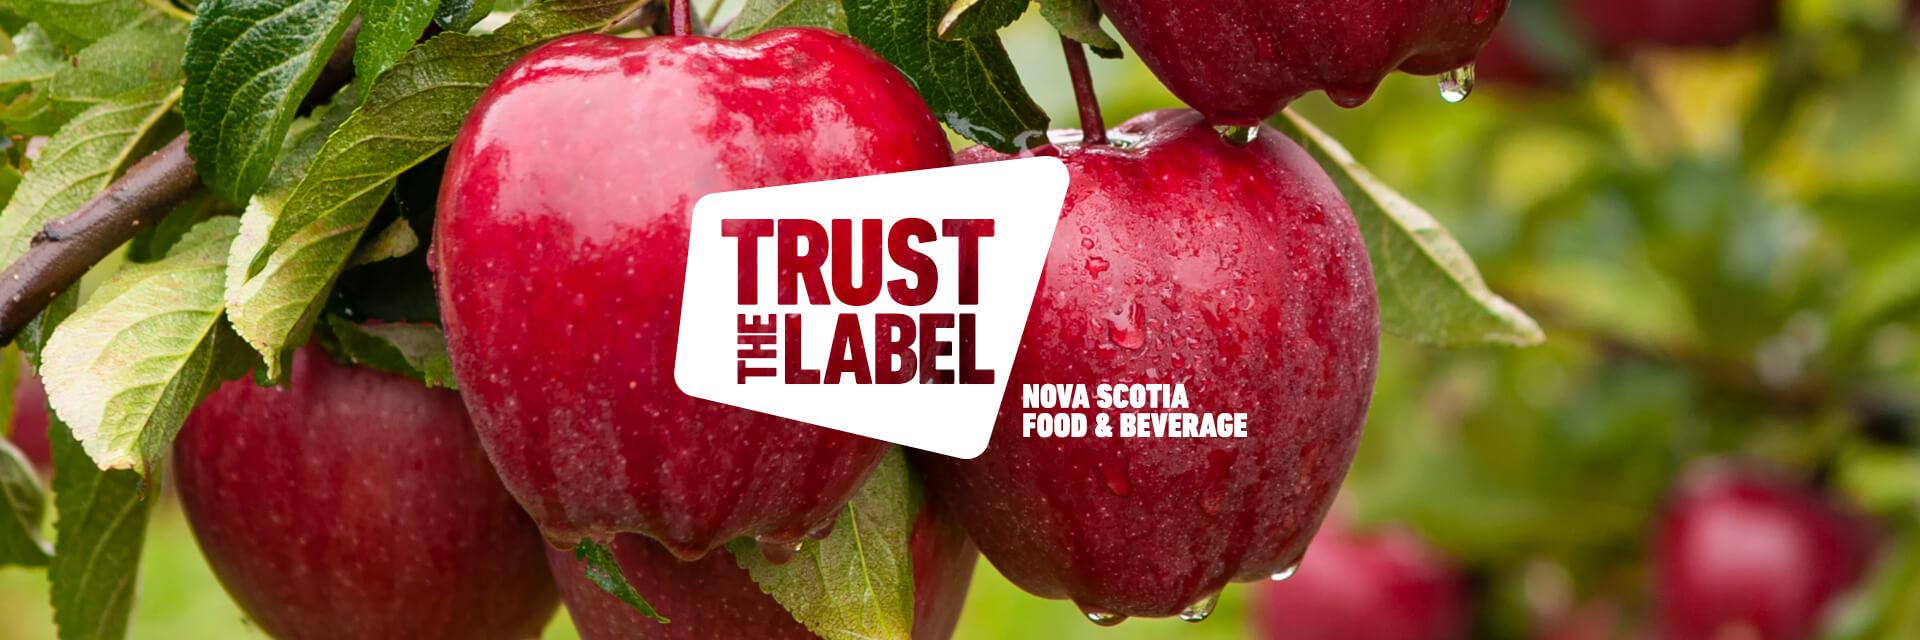 A 'Trust the Label' Nova Scotia Food and Beverage logo overlaid on a photo of red apples on a branch